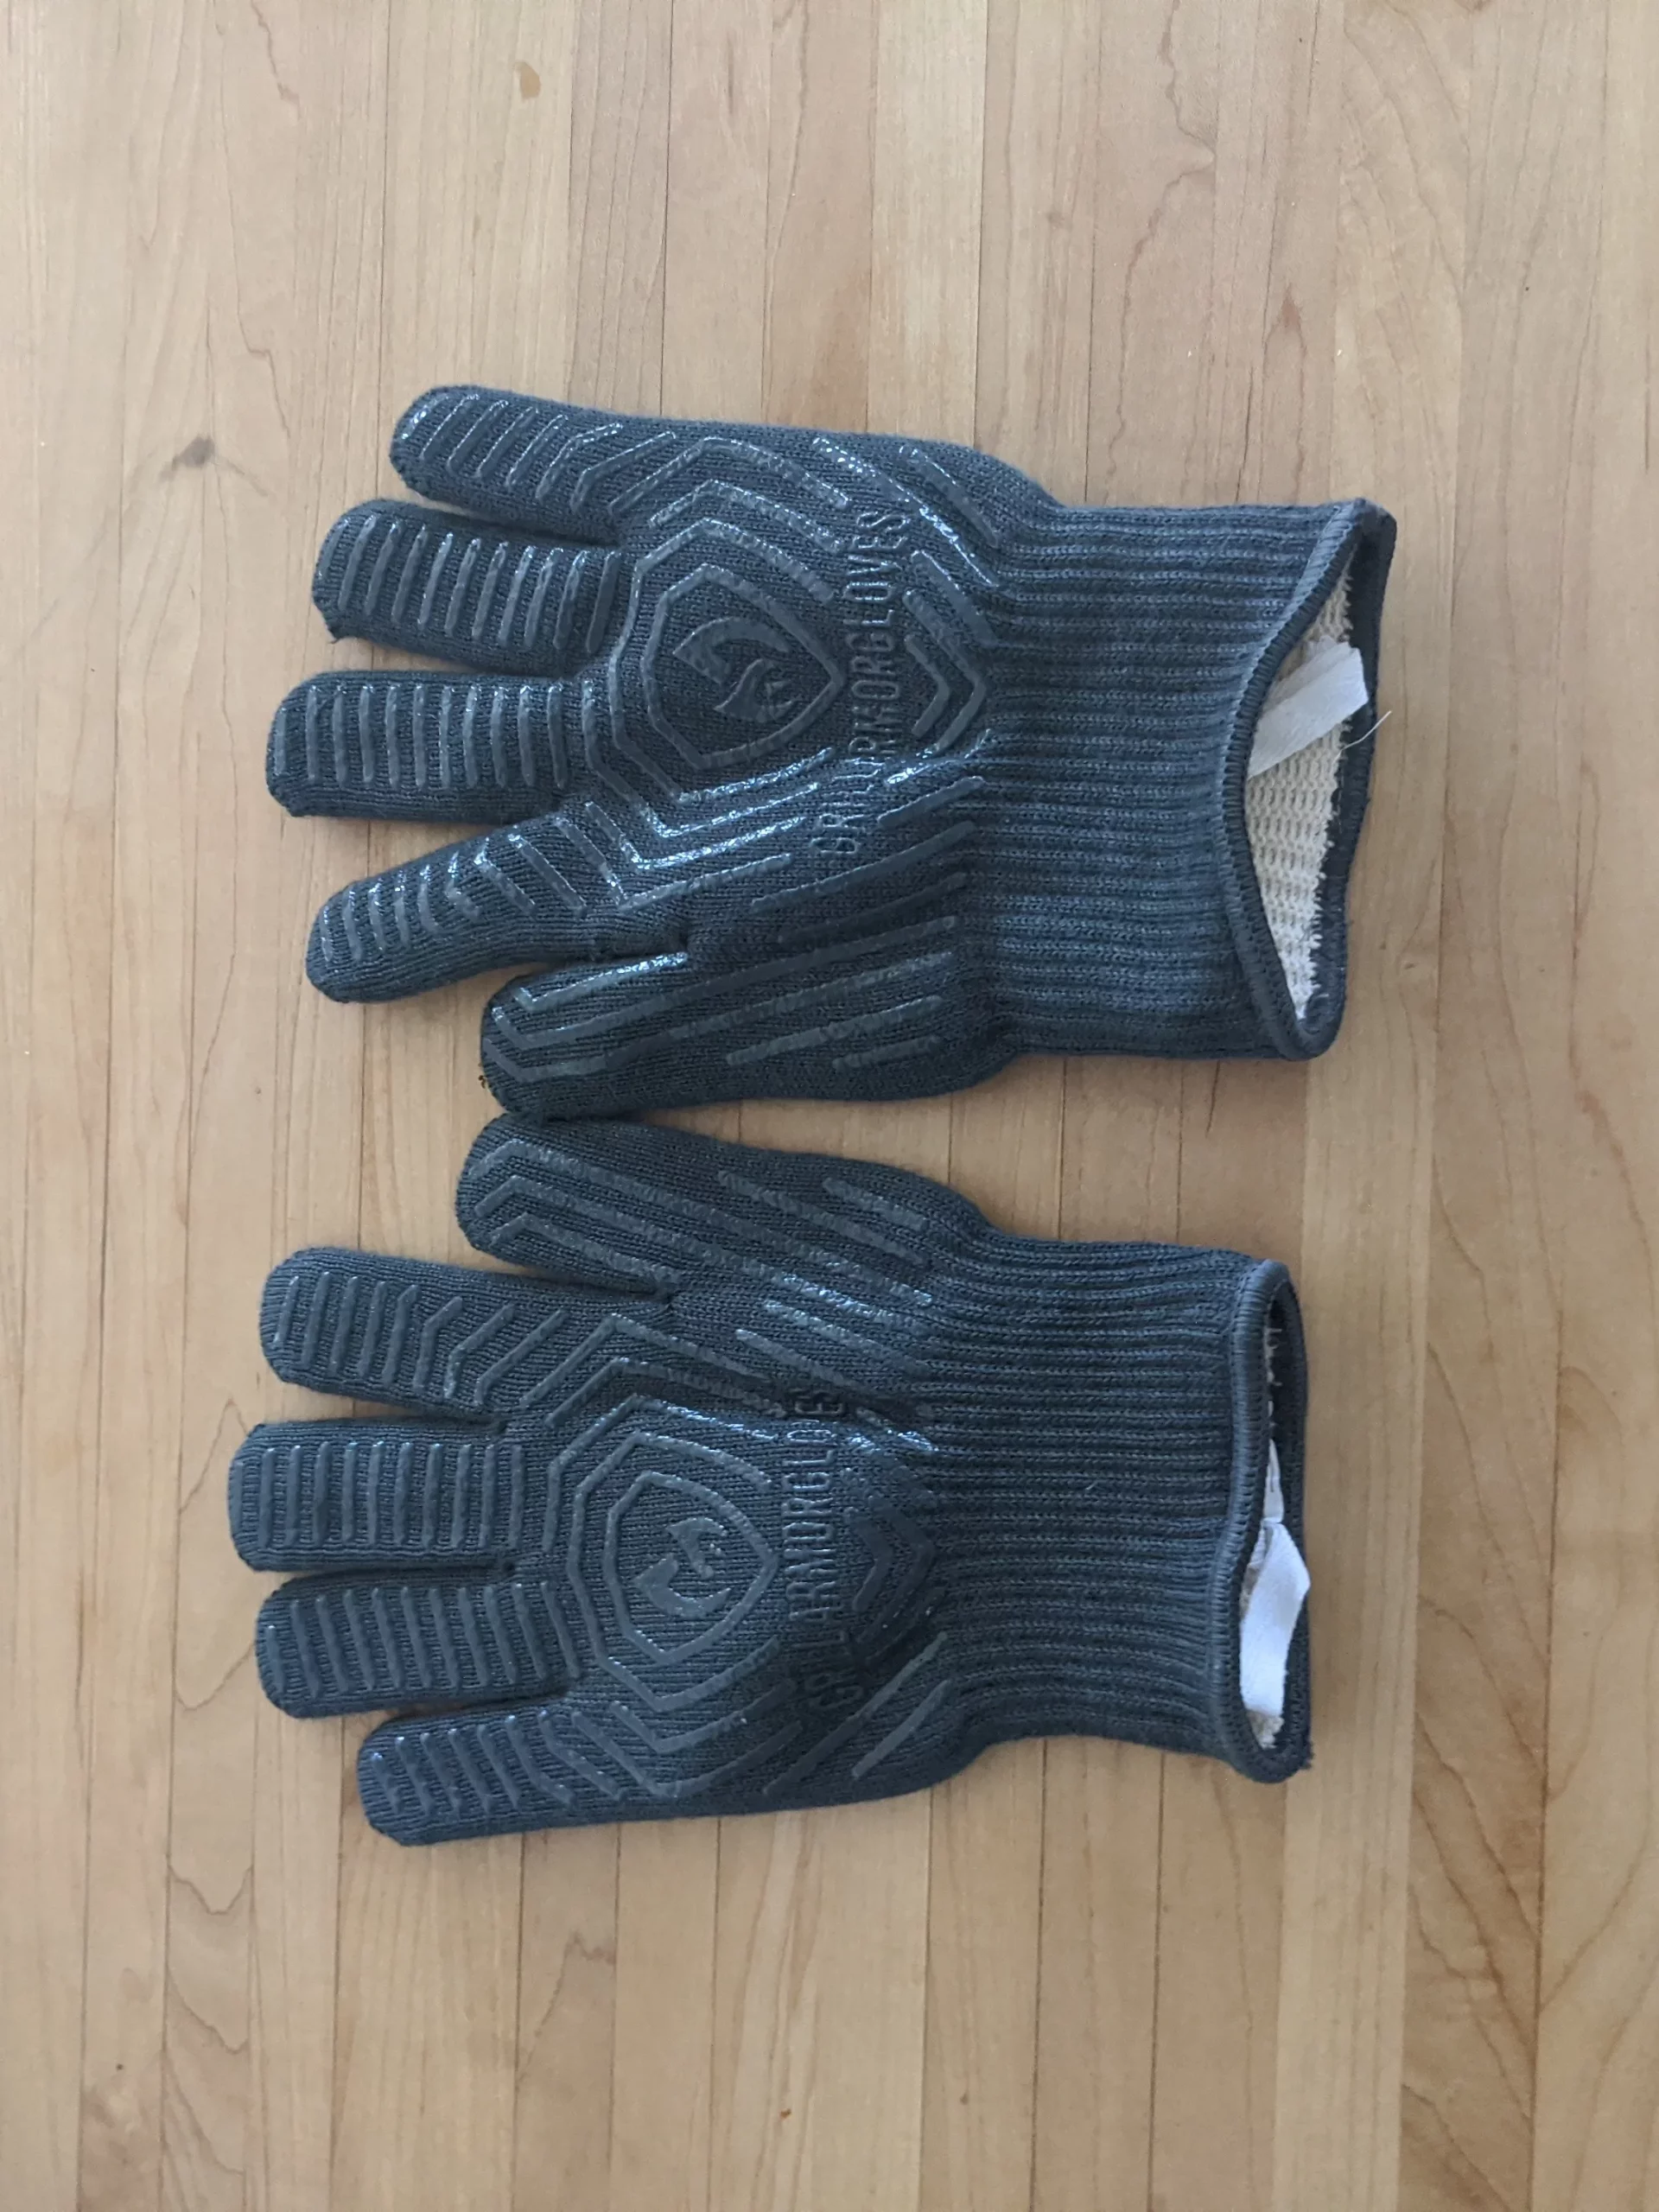 Grill Armor Gloves Edited Scaled